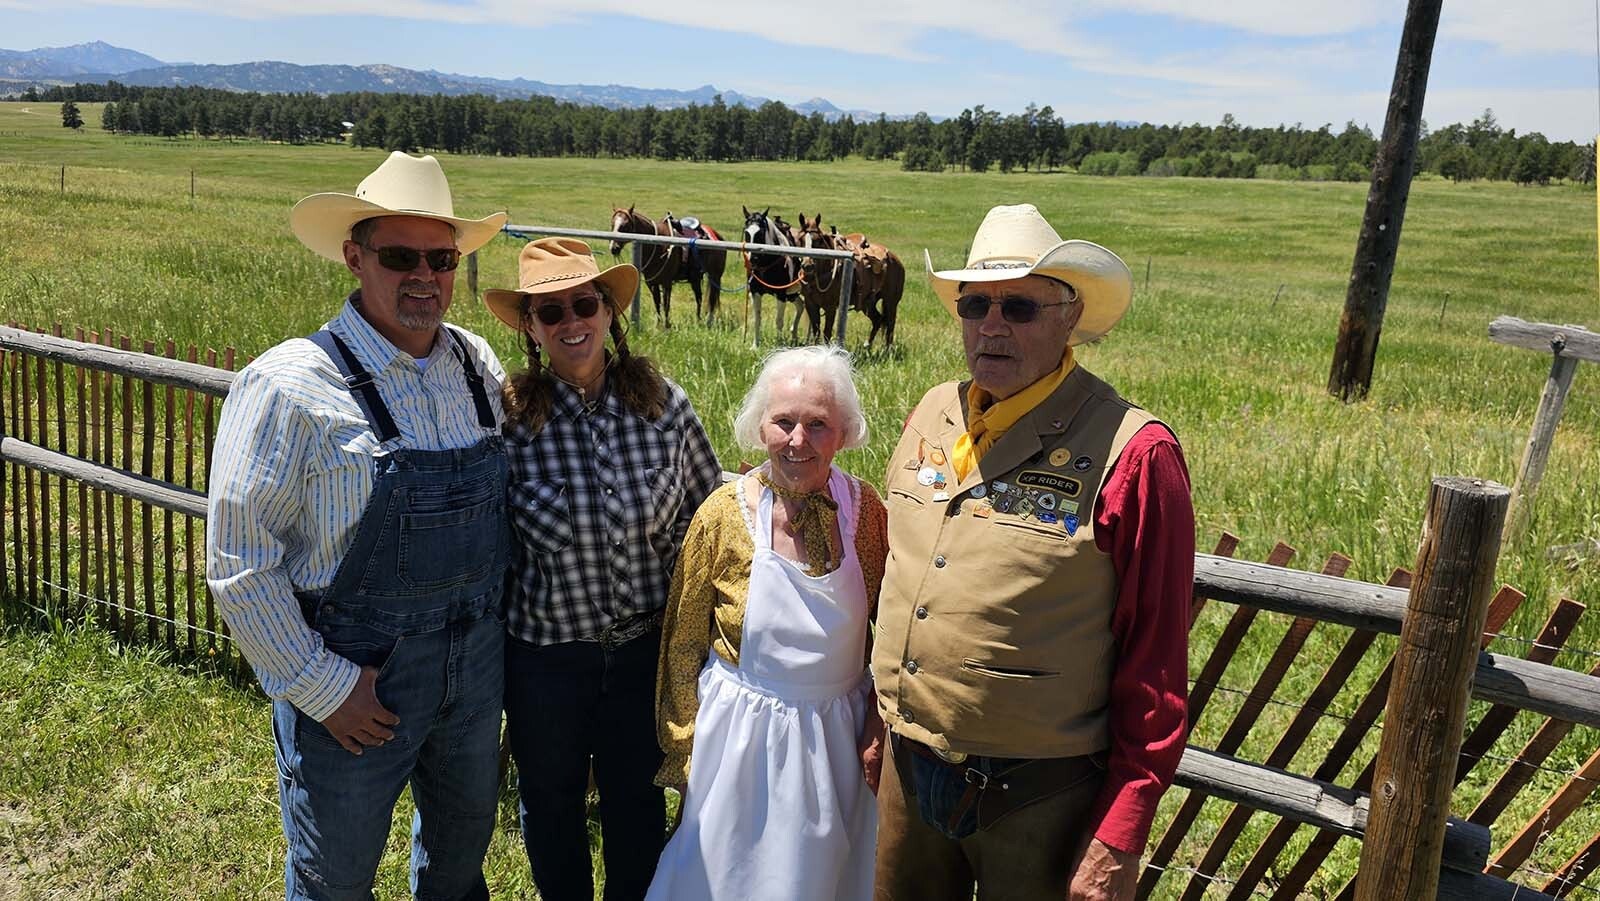 From left, Errin and Lynnae Kolden pose with Mary and Ron Broten for a photo in front of the horses they rode to Buckboard Sunday.